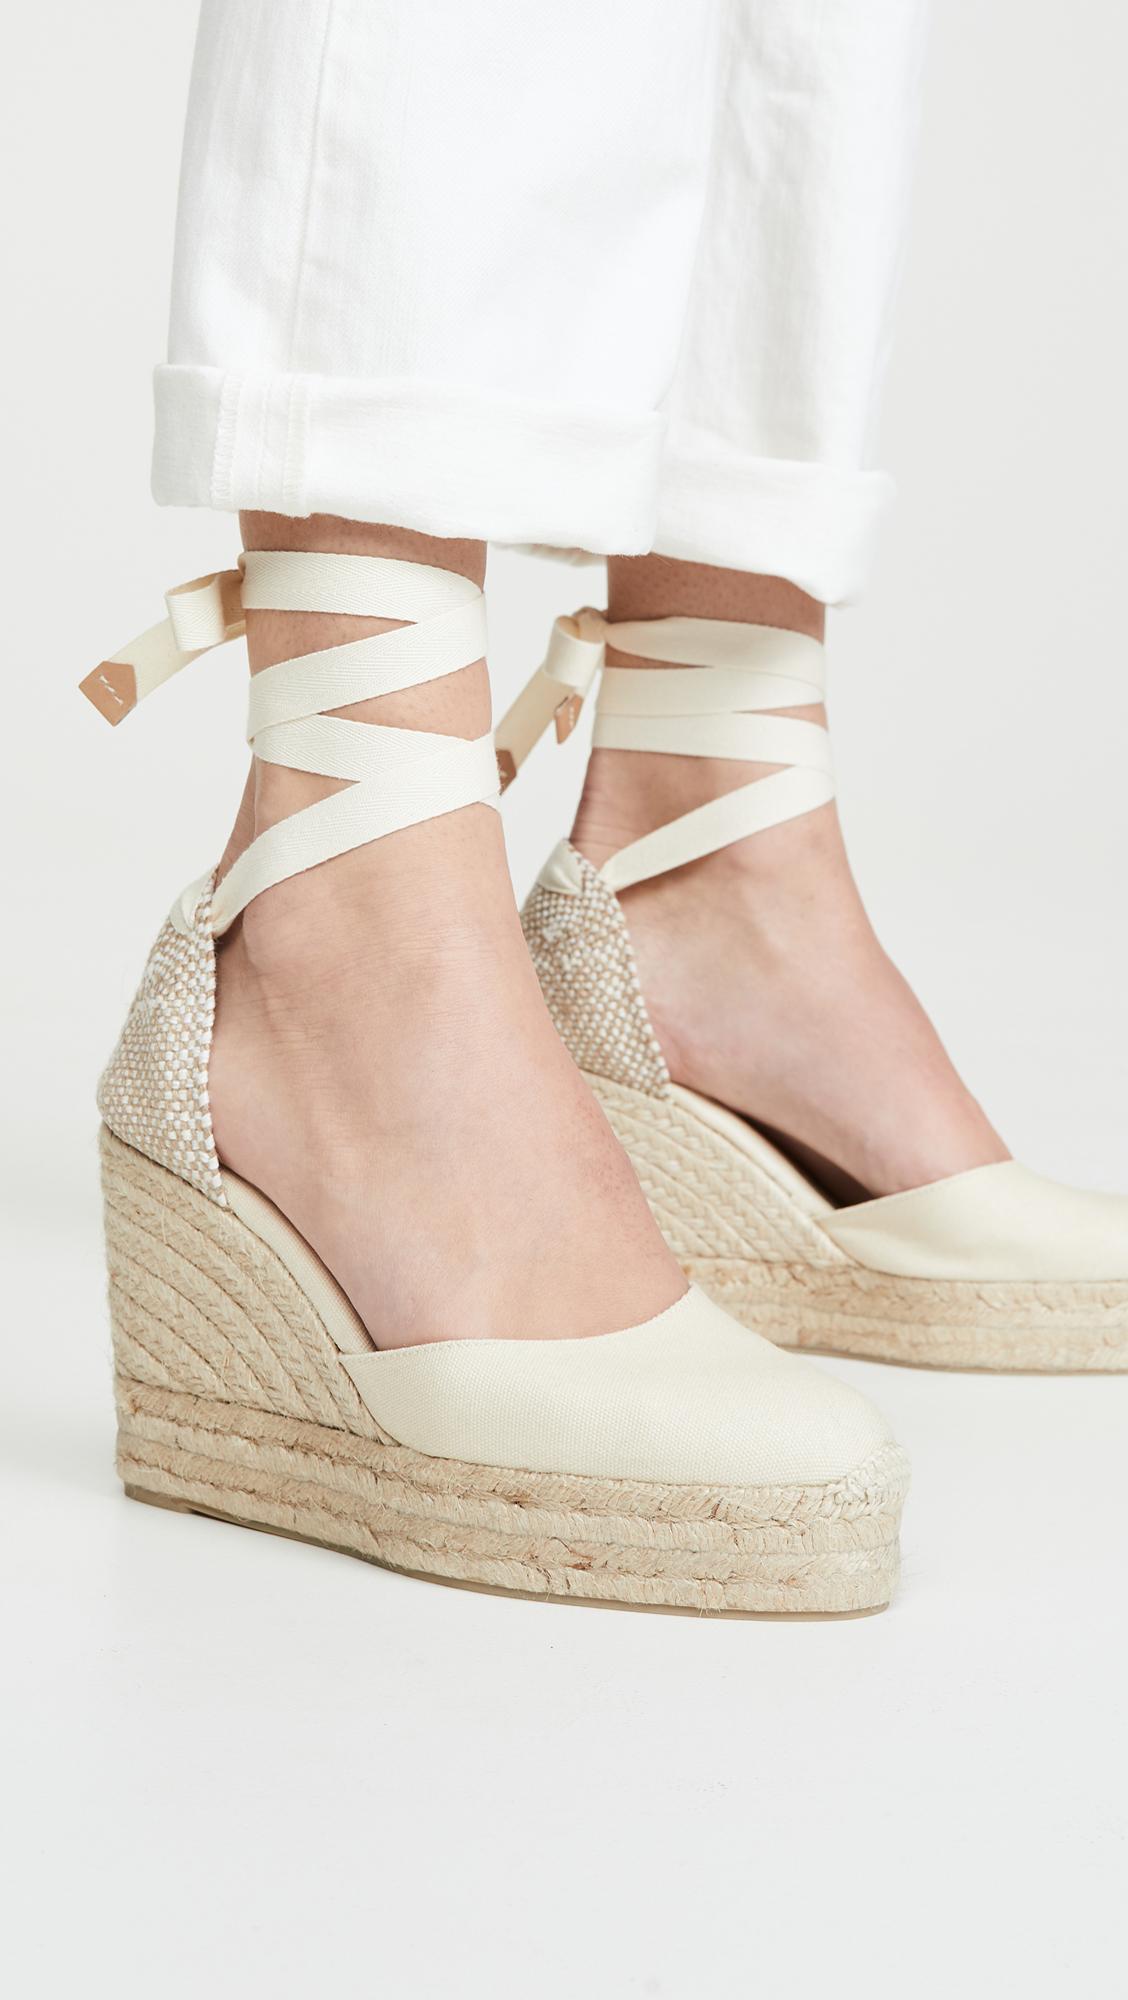 Carina Espadrilles in Ivory (White) - Lyst